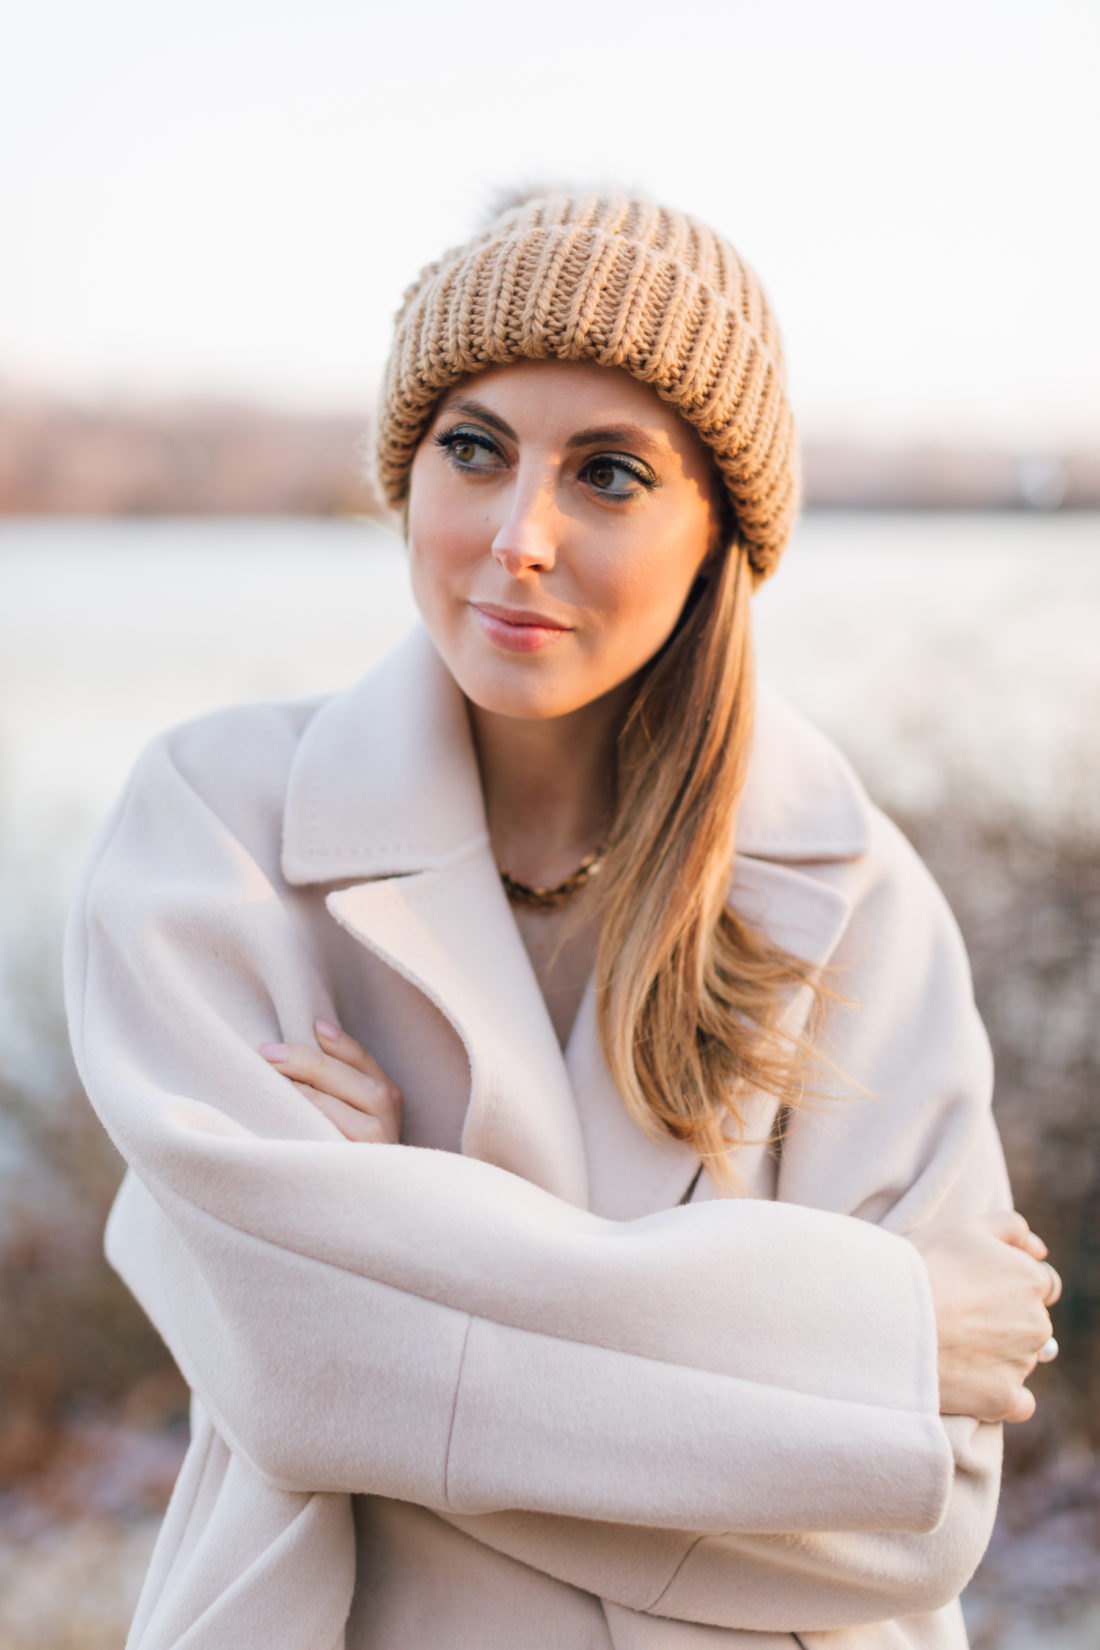 Eva Amurri shares how she's letting go of toxic relationships this holiday season